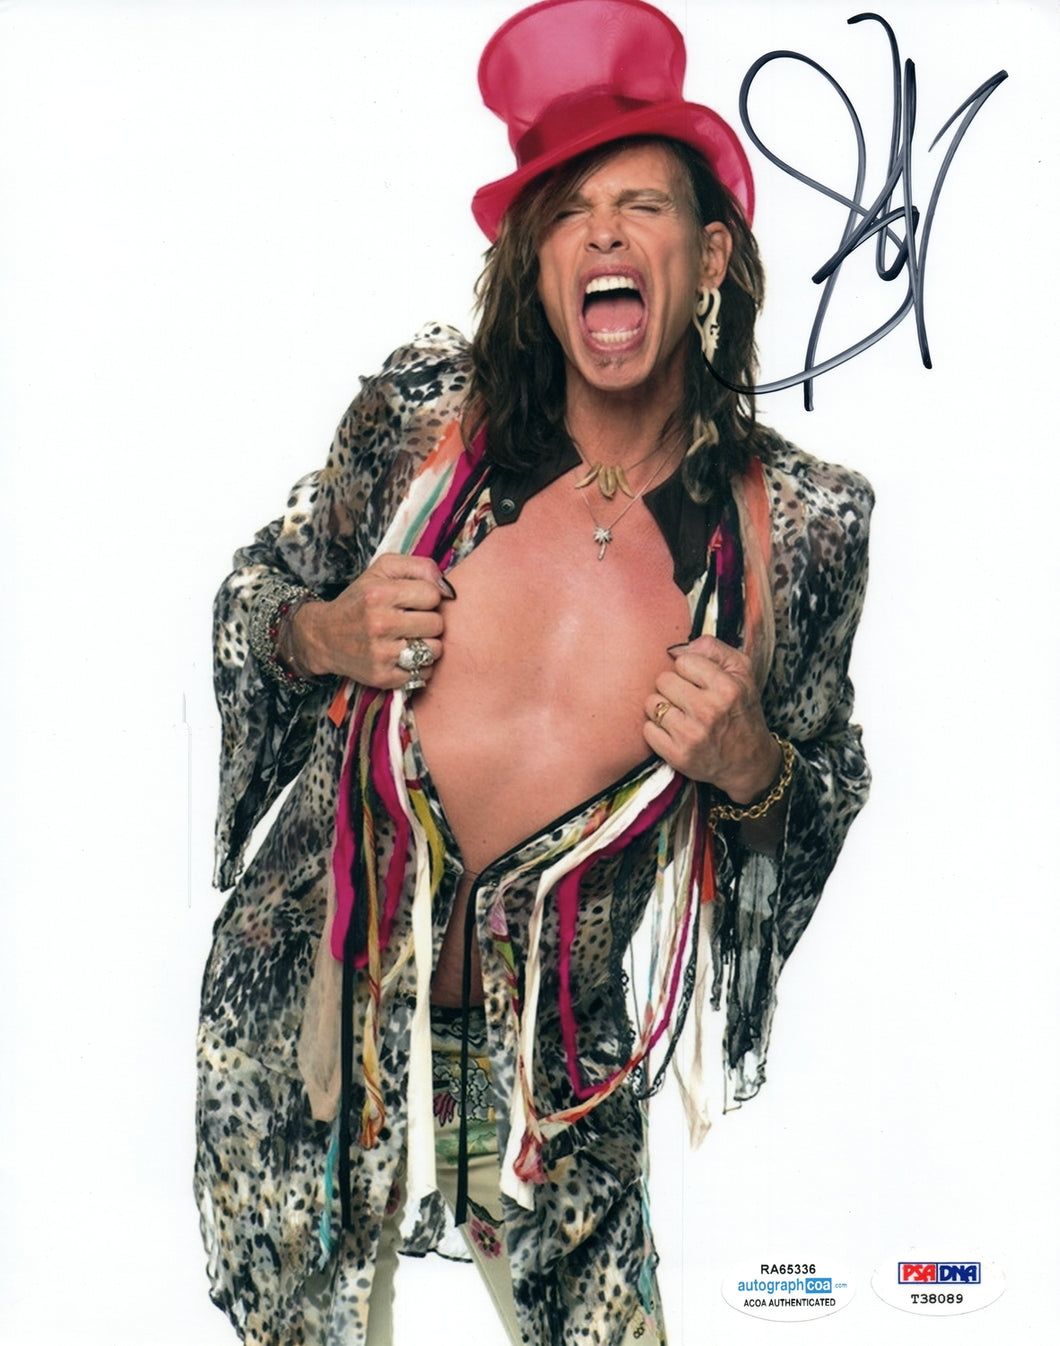 Steven Tyler Autographed Signed 8x10 Photo